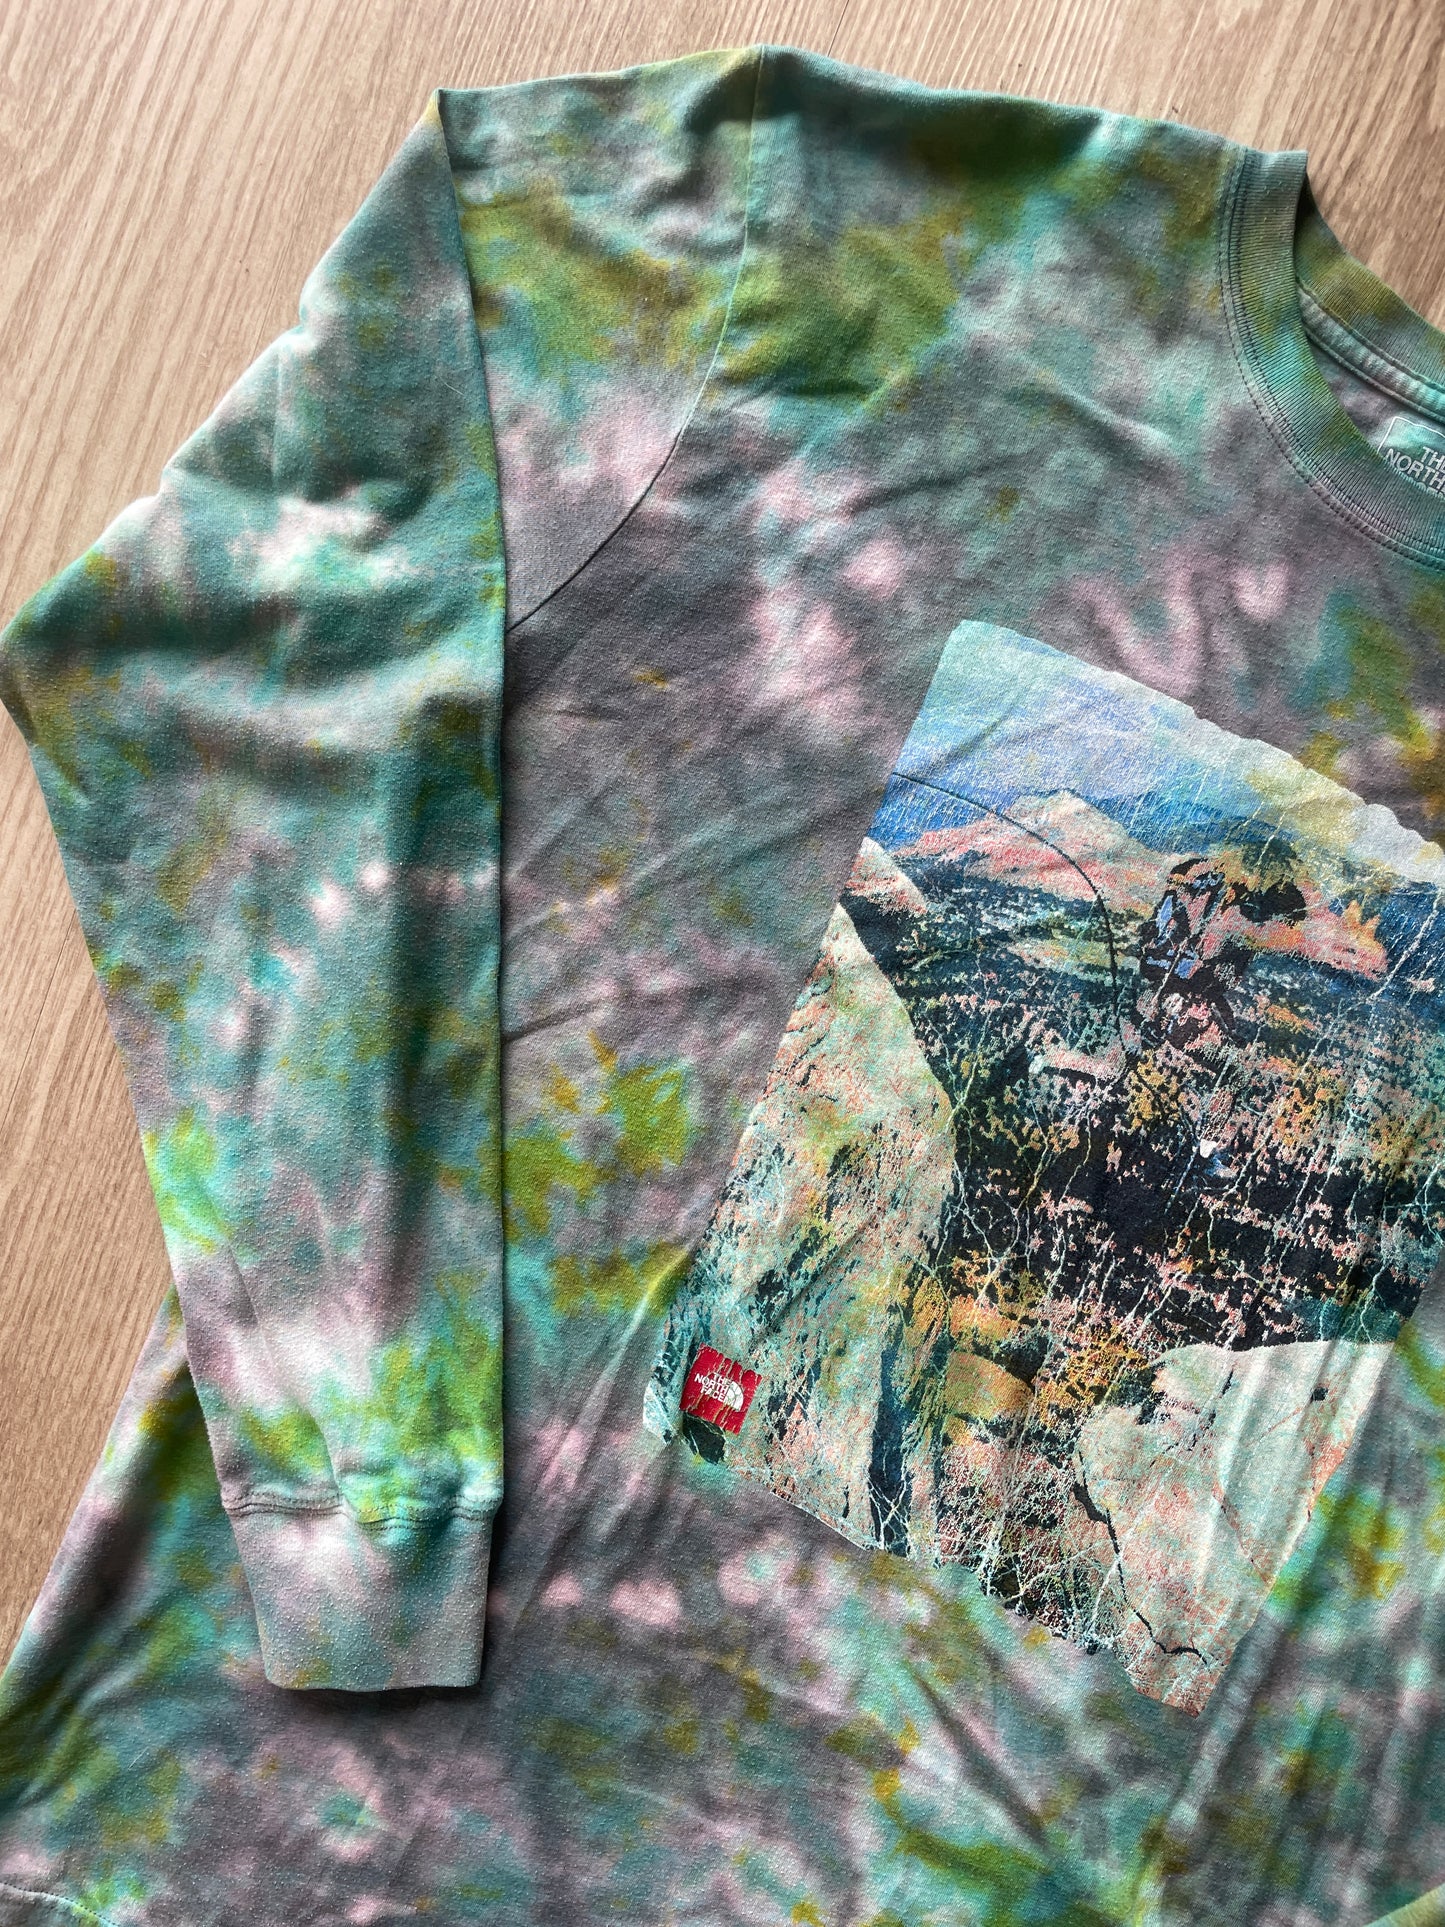 XL Men’s The North Face Desert Landscape Handmade Tie Dye T-Shirt | One-Of-a-Kind Shades of Green Earth Tones Long Sleeve